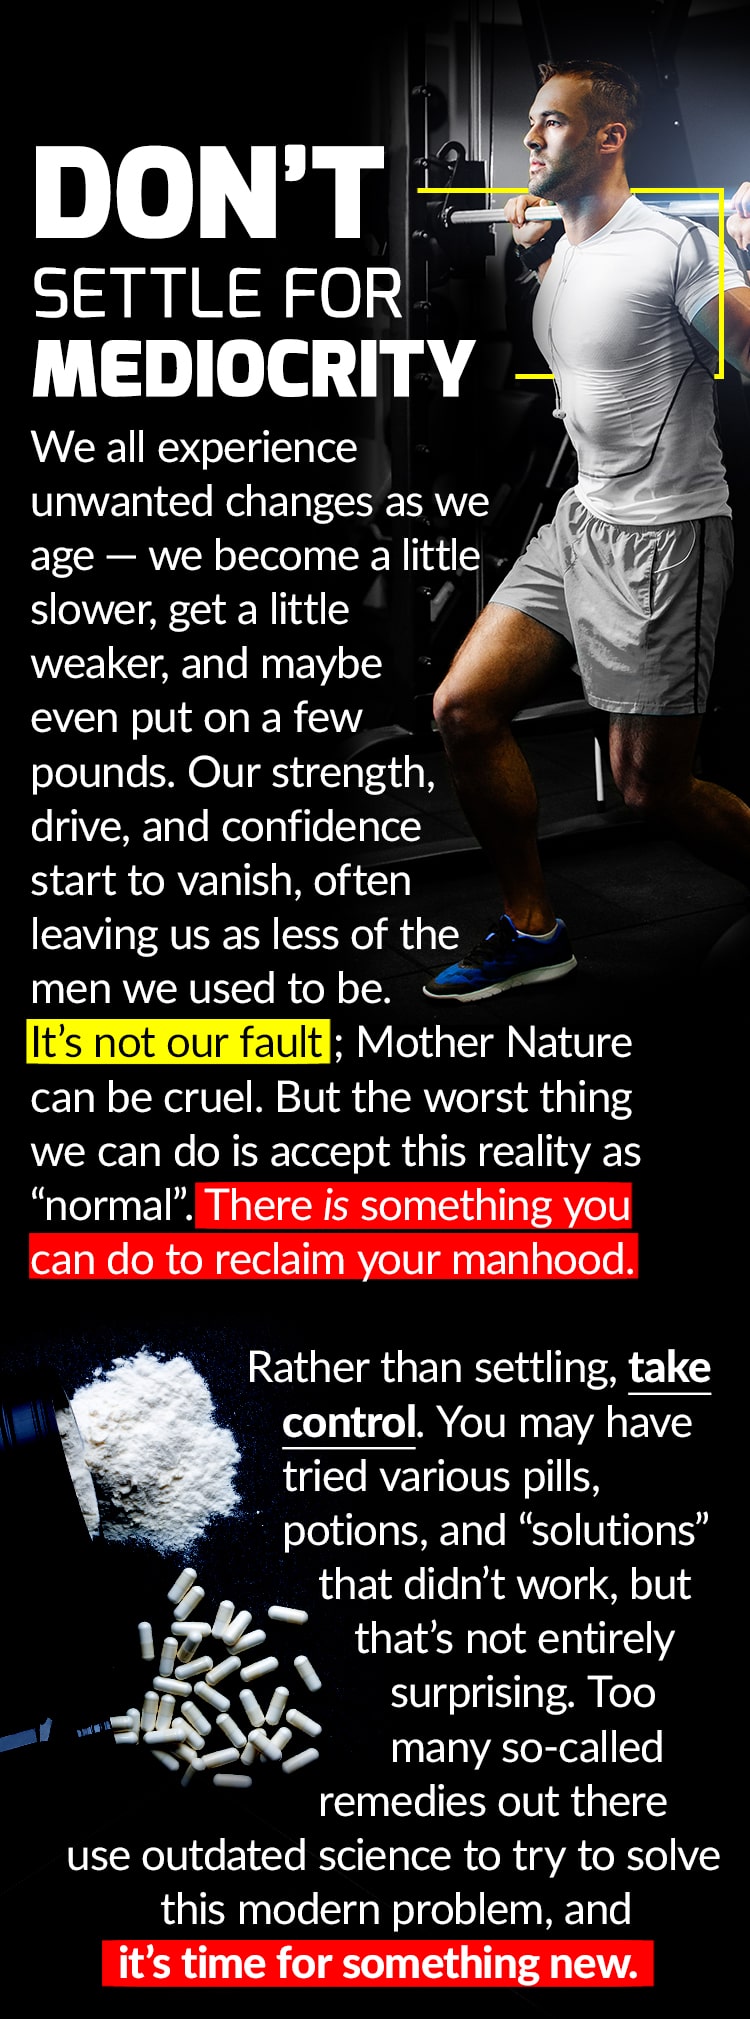 DON’T SETTLE FOR MEDIOCRITY. We all experience unwanted changes as we age – we become a little slower, get a little weaker, and maybe even put on a few pounds. Our strength, drive, and confidence start to vanish, often leaving us as less of the men we used to be. It’s not our fault; Mother Nature can be cruel. But the worse thing we can do is accept this reality as “normal”. There is something you can do to reclaim your manhood. Rather than settling, take control. You may have tried various pills, potions, and “solutions” that didn’t work, but that’s not entirely surprising. Too many so-called remedies out there use outdated science to try to solve this modern problem, and it’s time for something new.